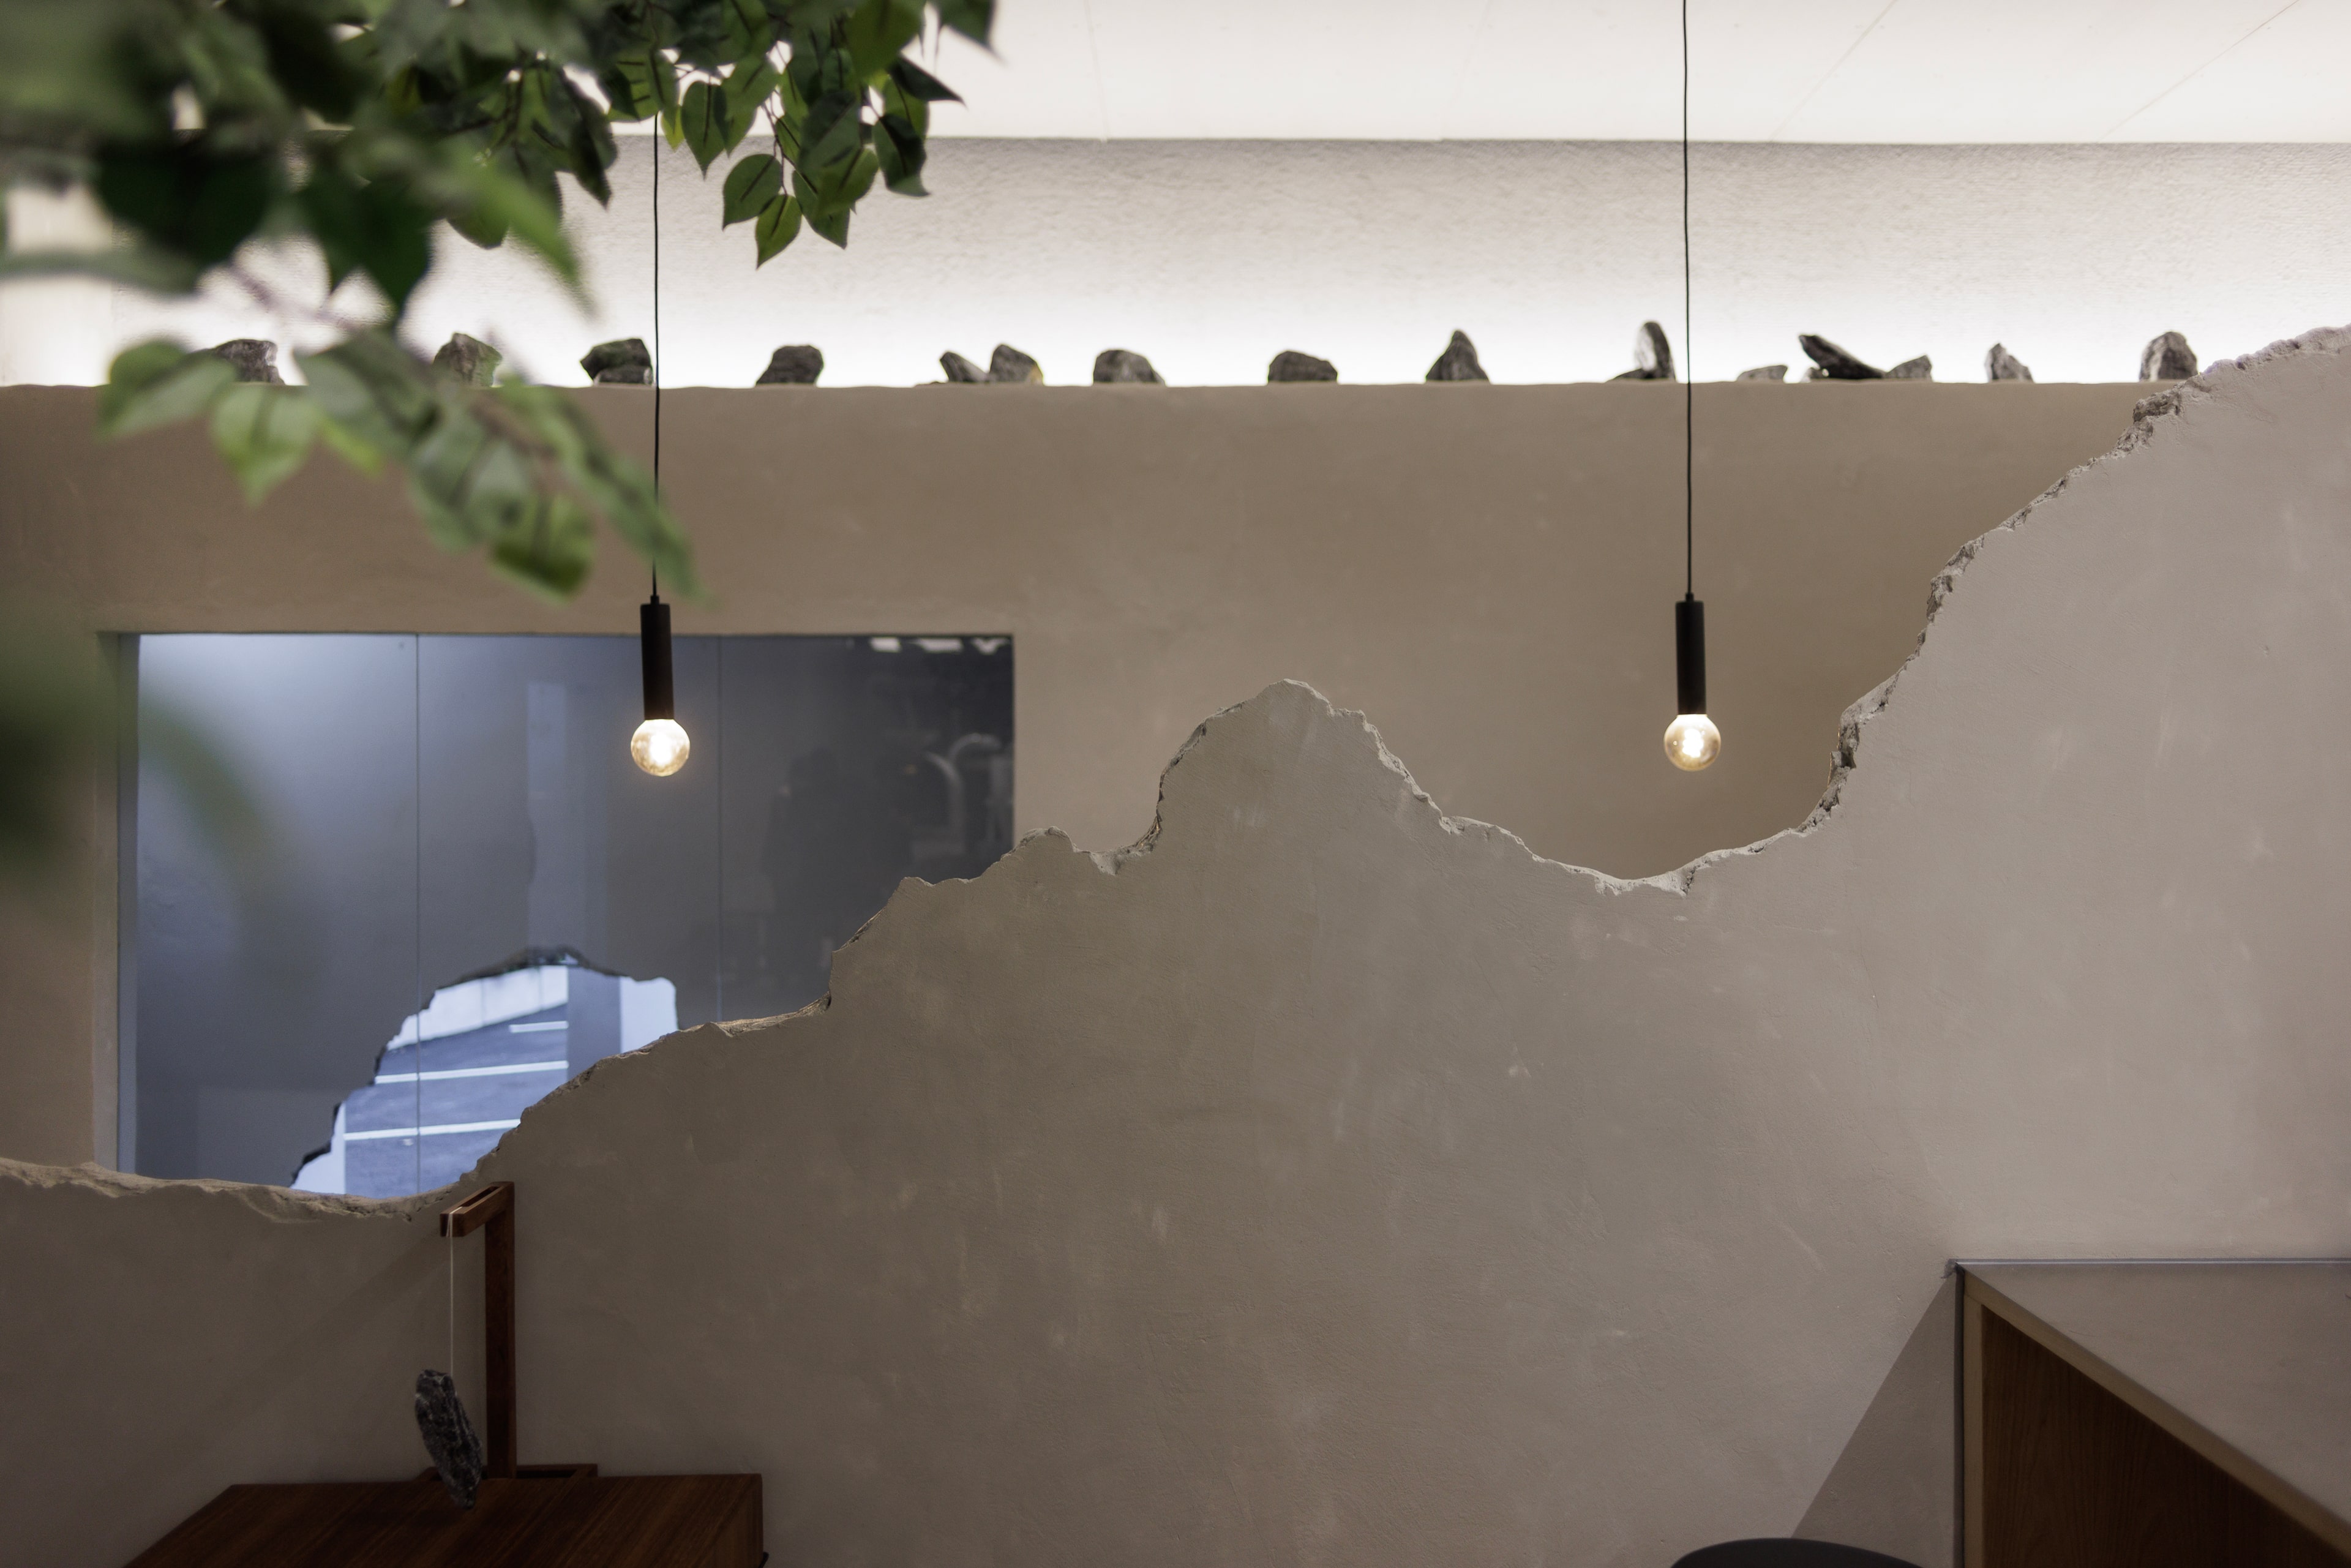 An incomplete wall separating the two areas in the cafÃ©'s interior